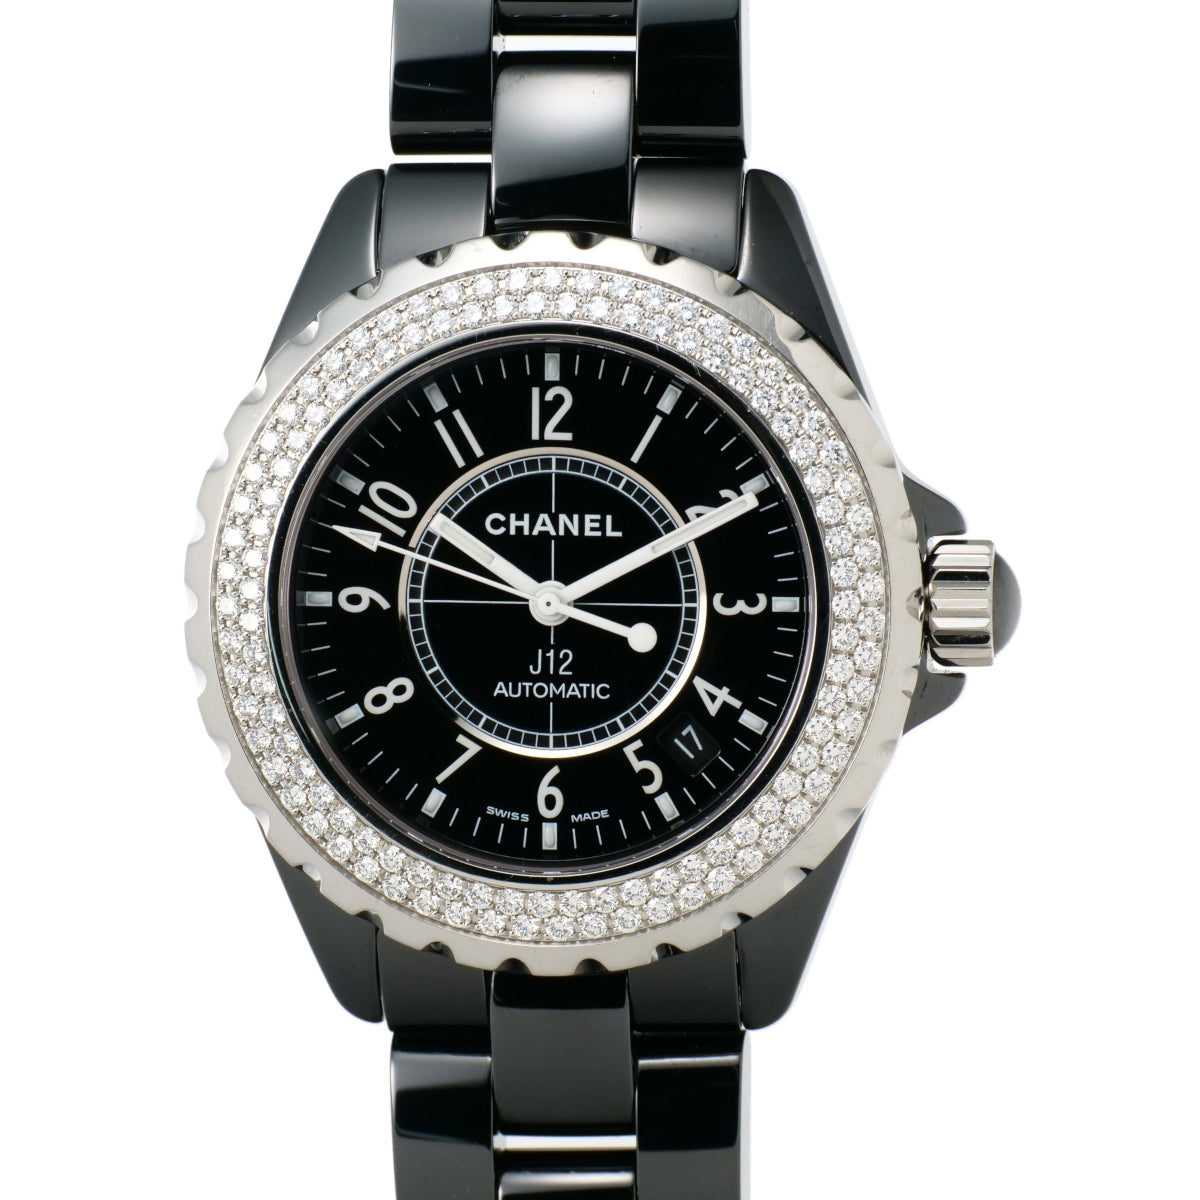 Chanel J12 Men's Watch with Diamond Bezel in Ceramic and Stainless Steel  H1629